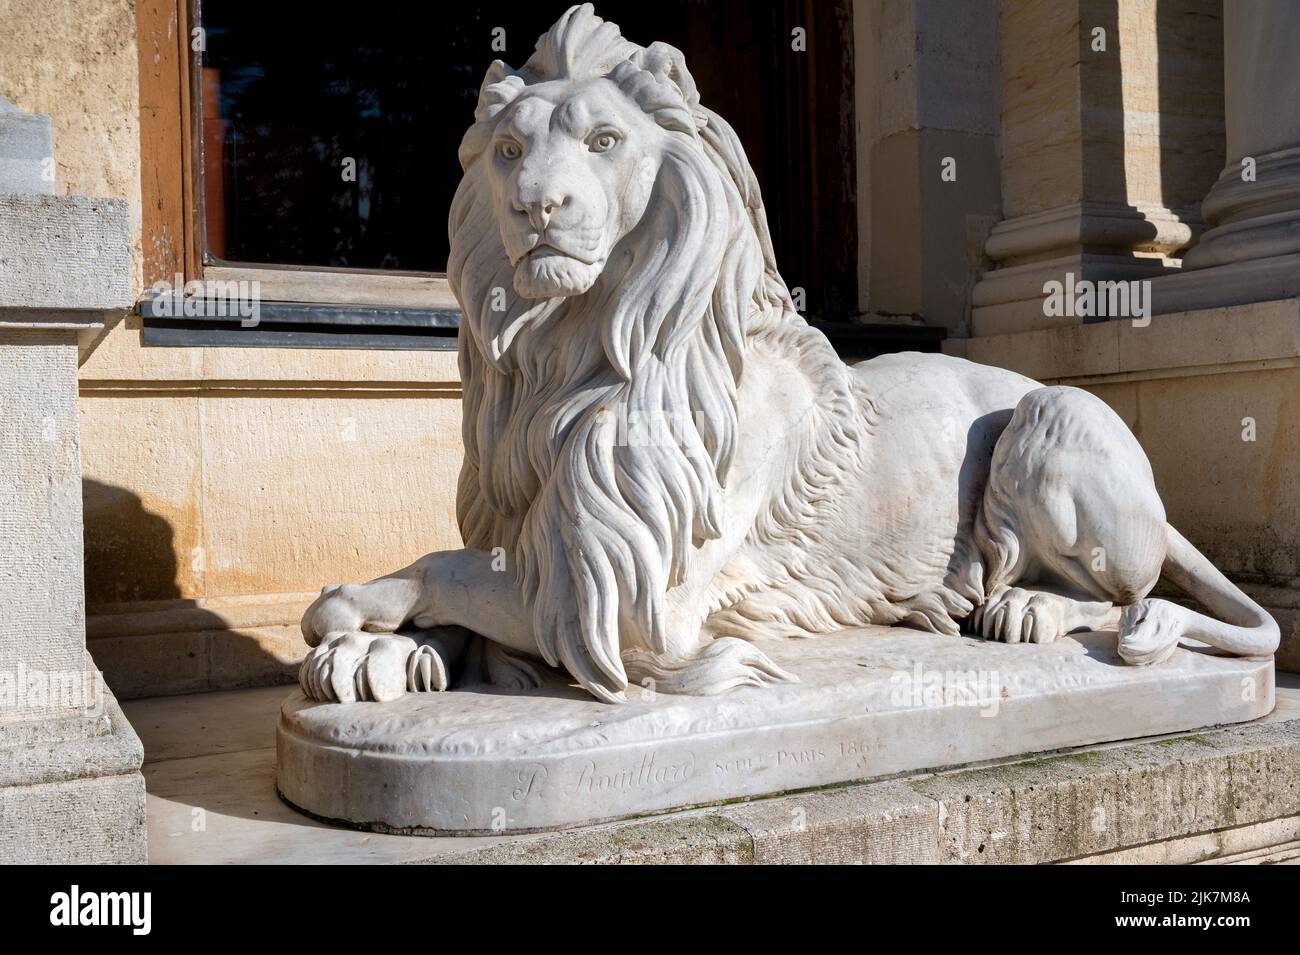 Lion Sculpture by the main entrance of Beylerbeyi Palace, Istanul, Turkey Stock Photo